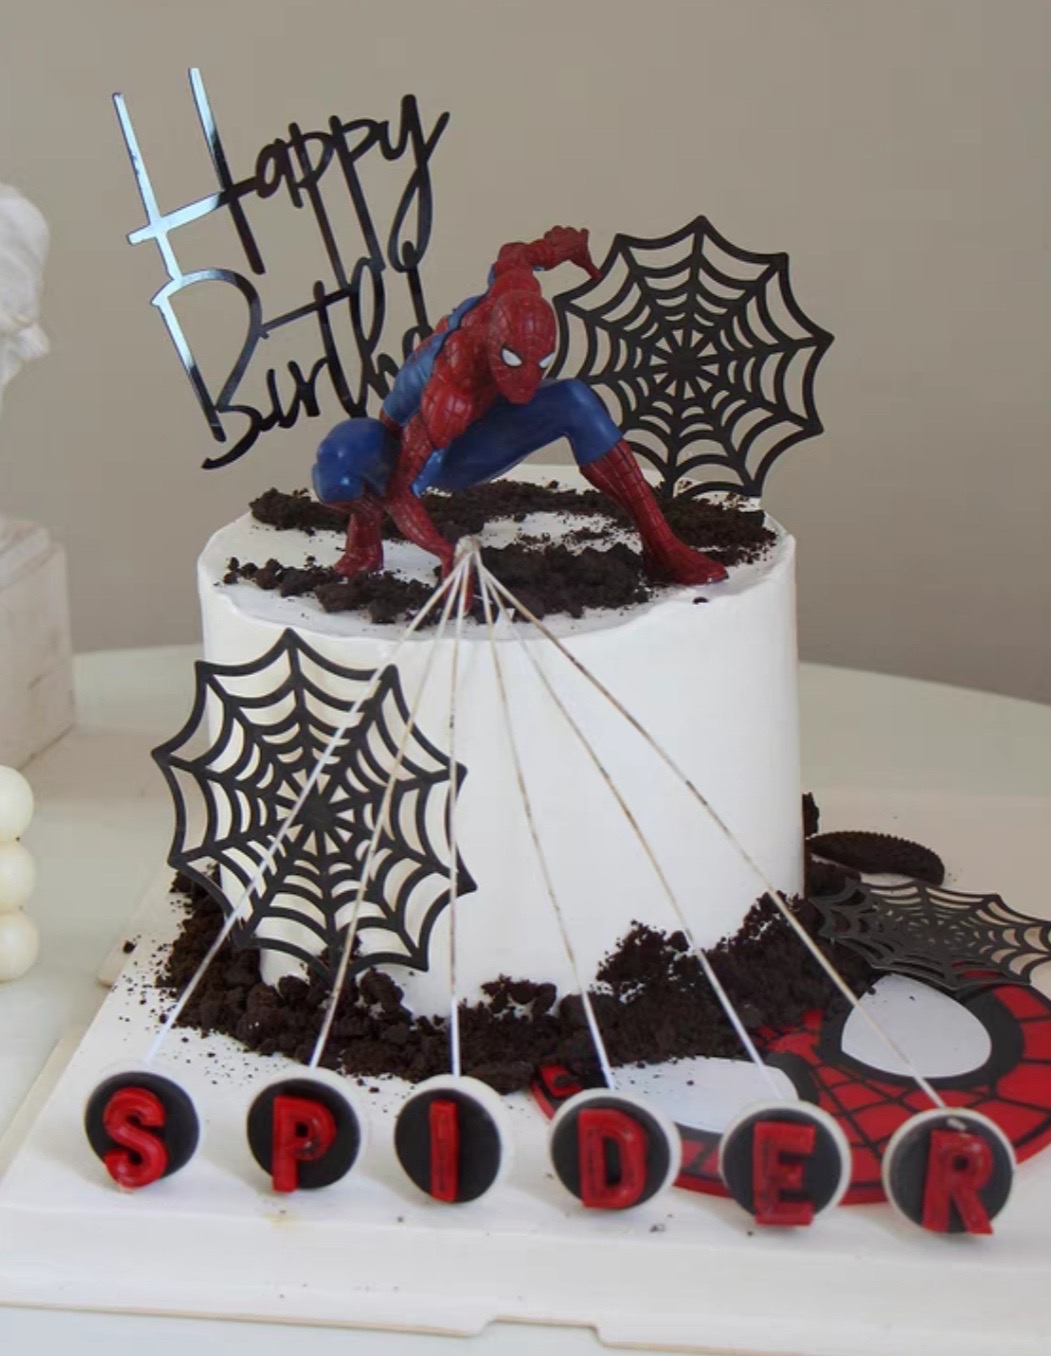 It was my sons 9th birthday and all he wanted was a Spider-Man cake, so  here is my Spider-Man chocolate Nutella cake. : r/cakedecorating